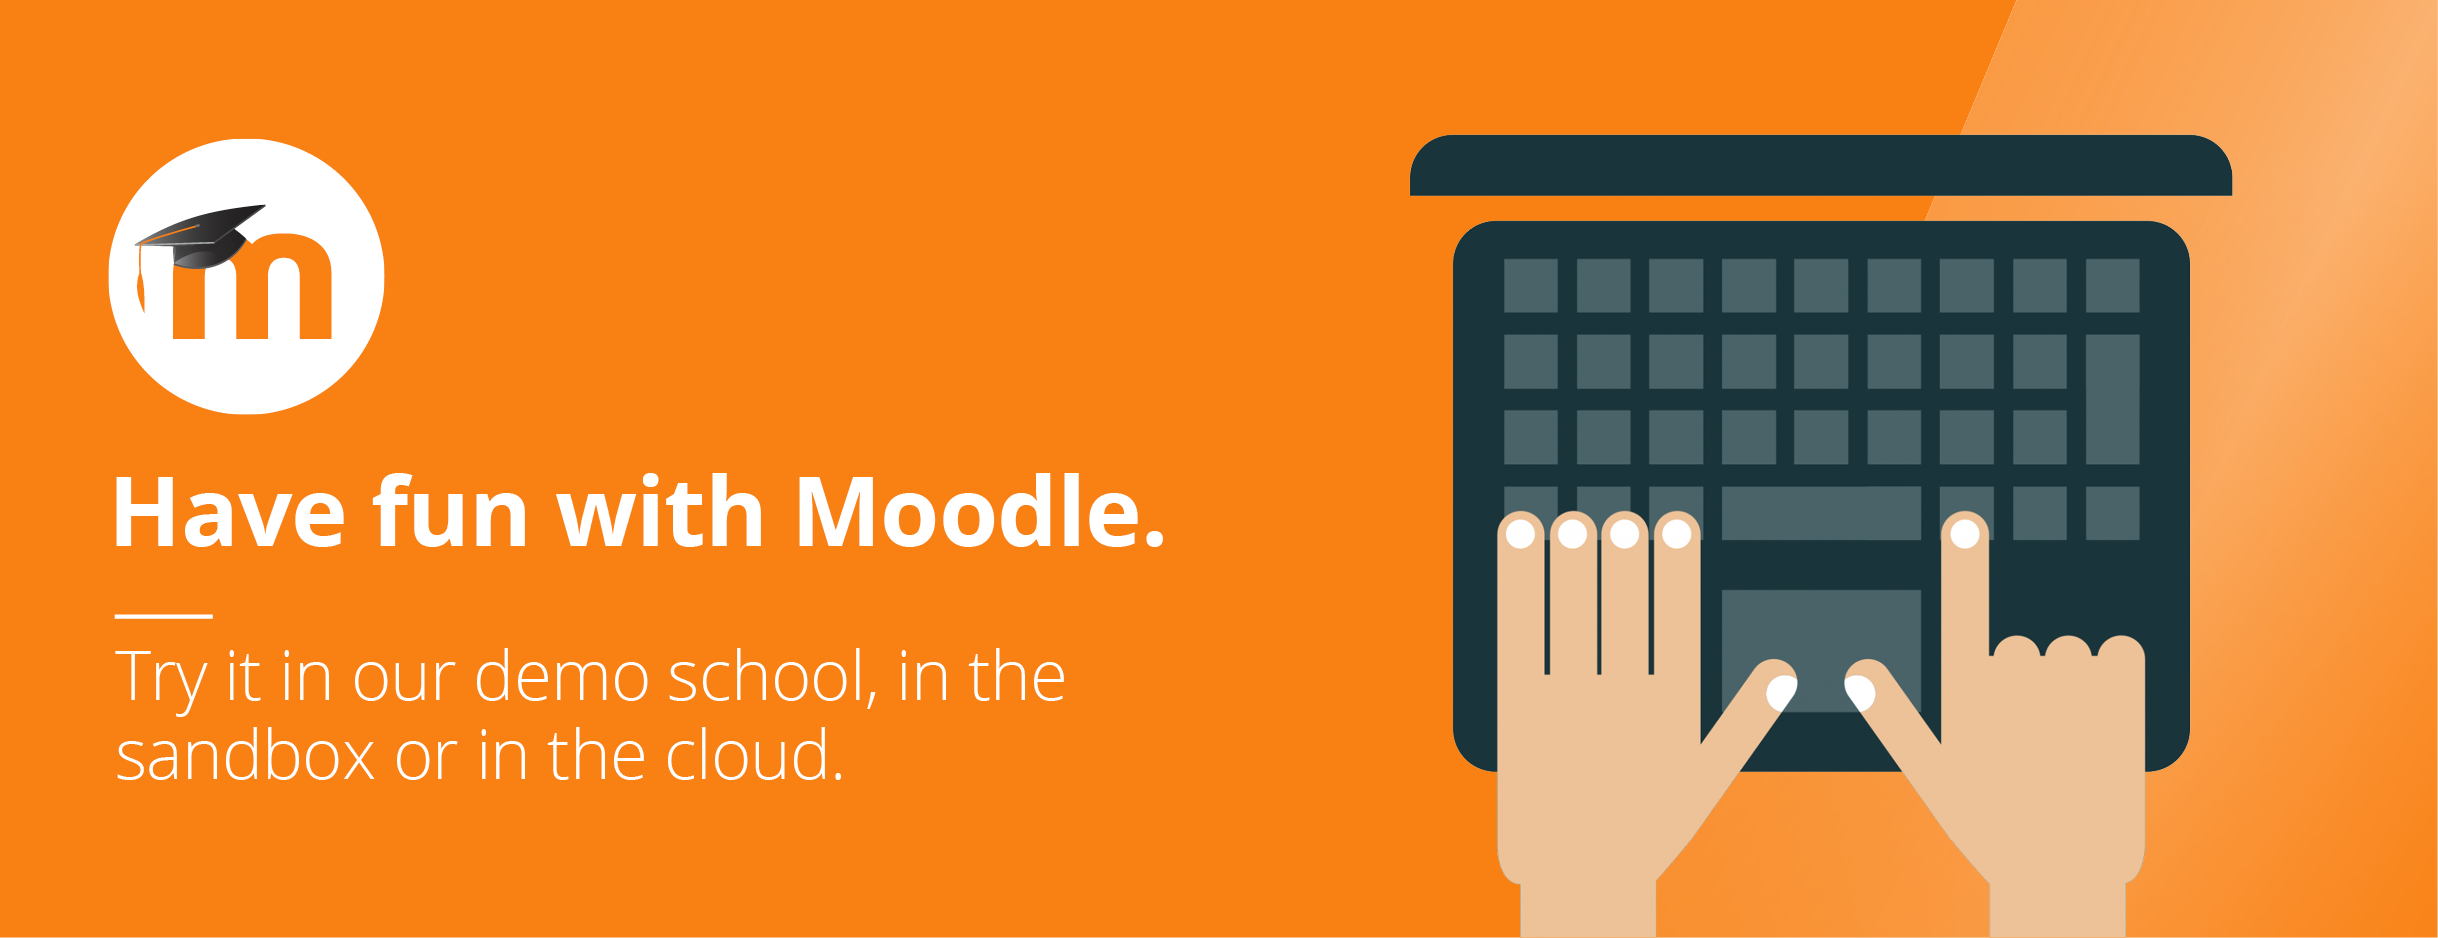 3 Ways To Try Moodle Image